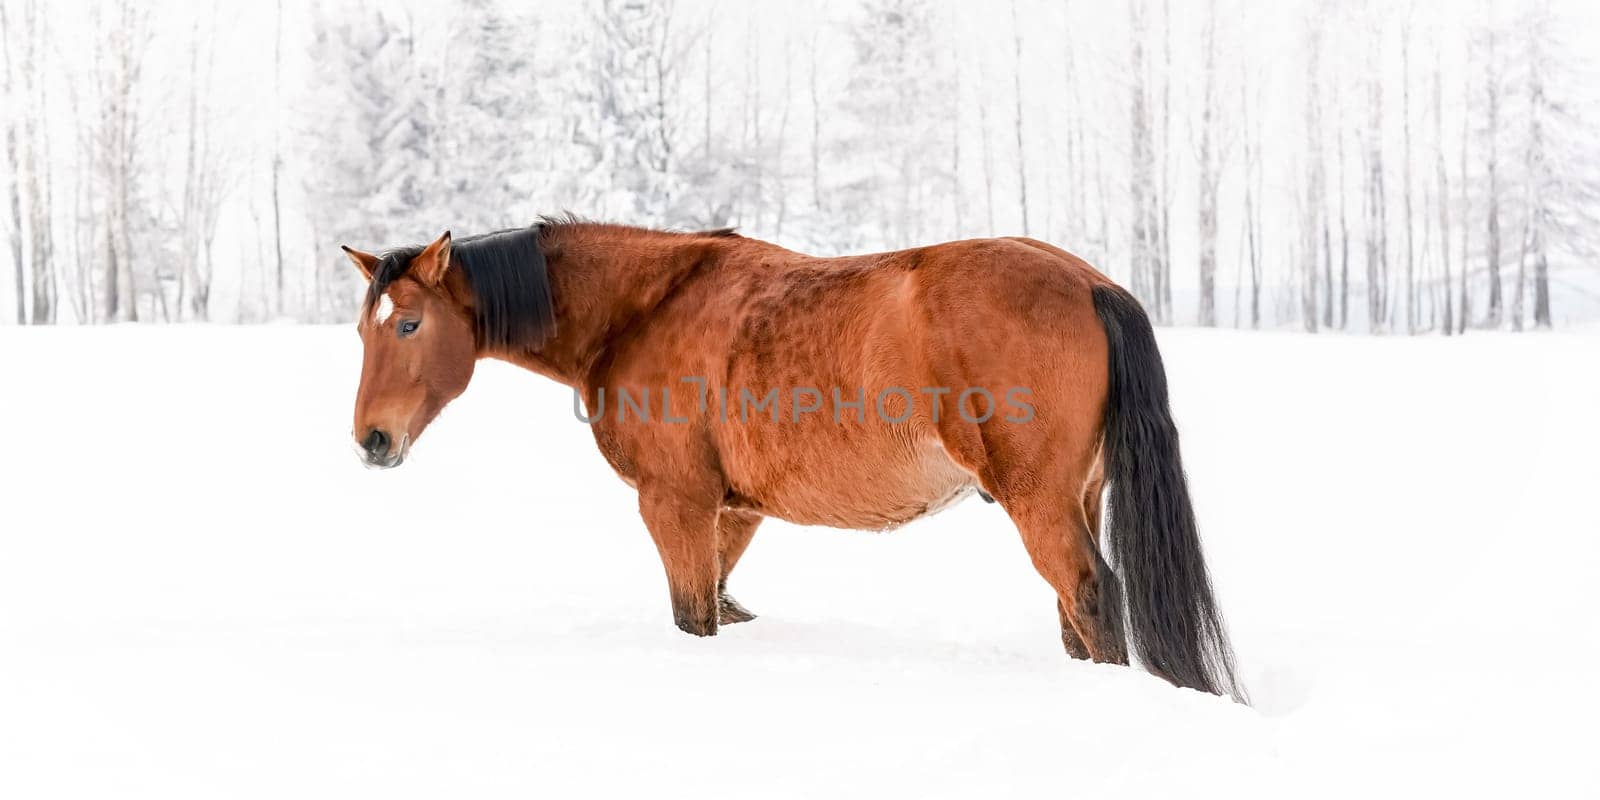 Horse standing on snow field, blurred trees in background, overcast morning.